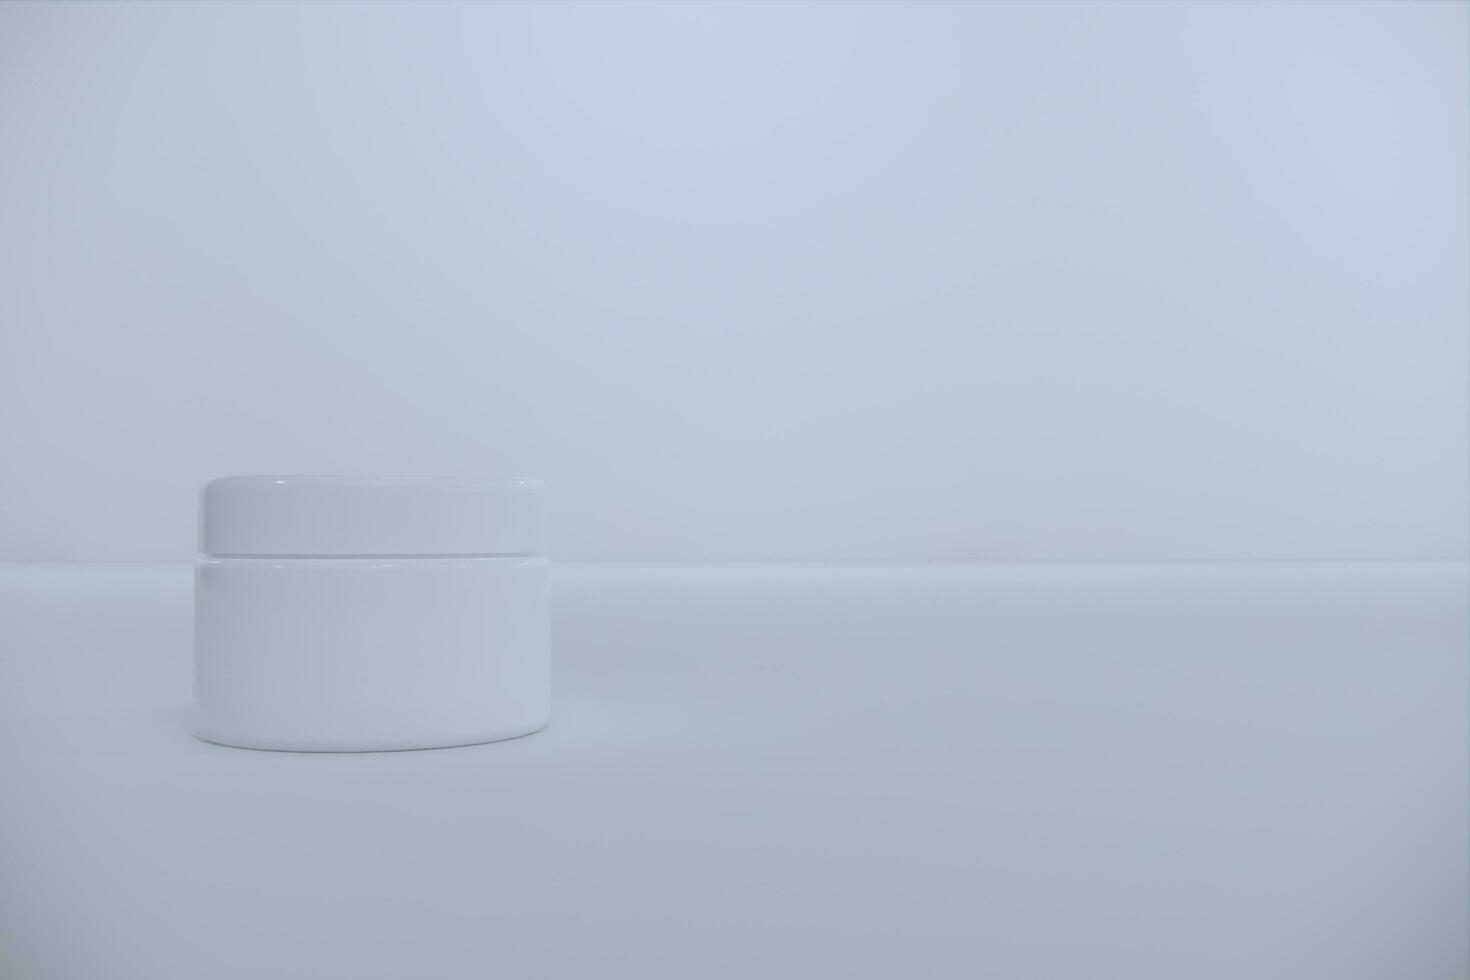 White blank glossy cosmetic plastic jar mock up template on isolated white background, cosmetic container for body cream, gel, butter, bath salt, skin care, powder. 3D illustration photo